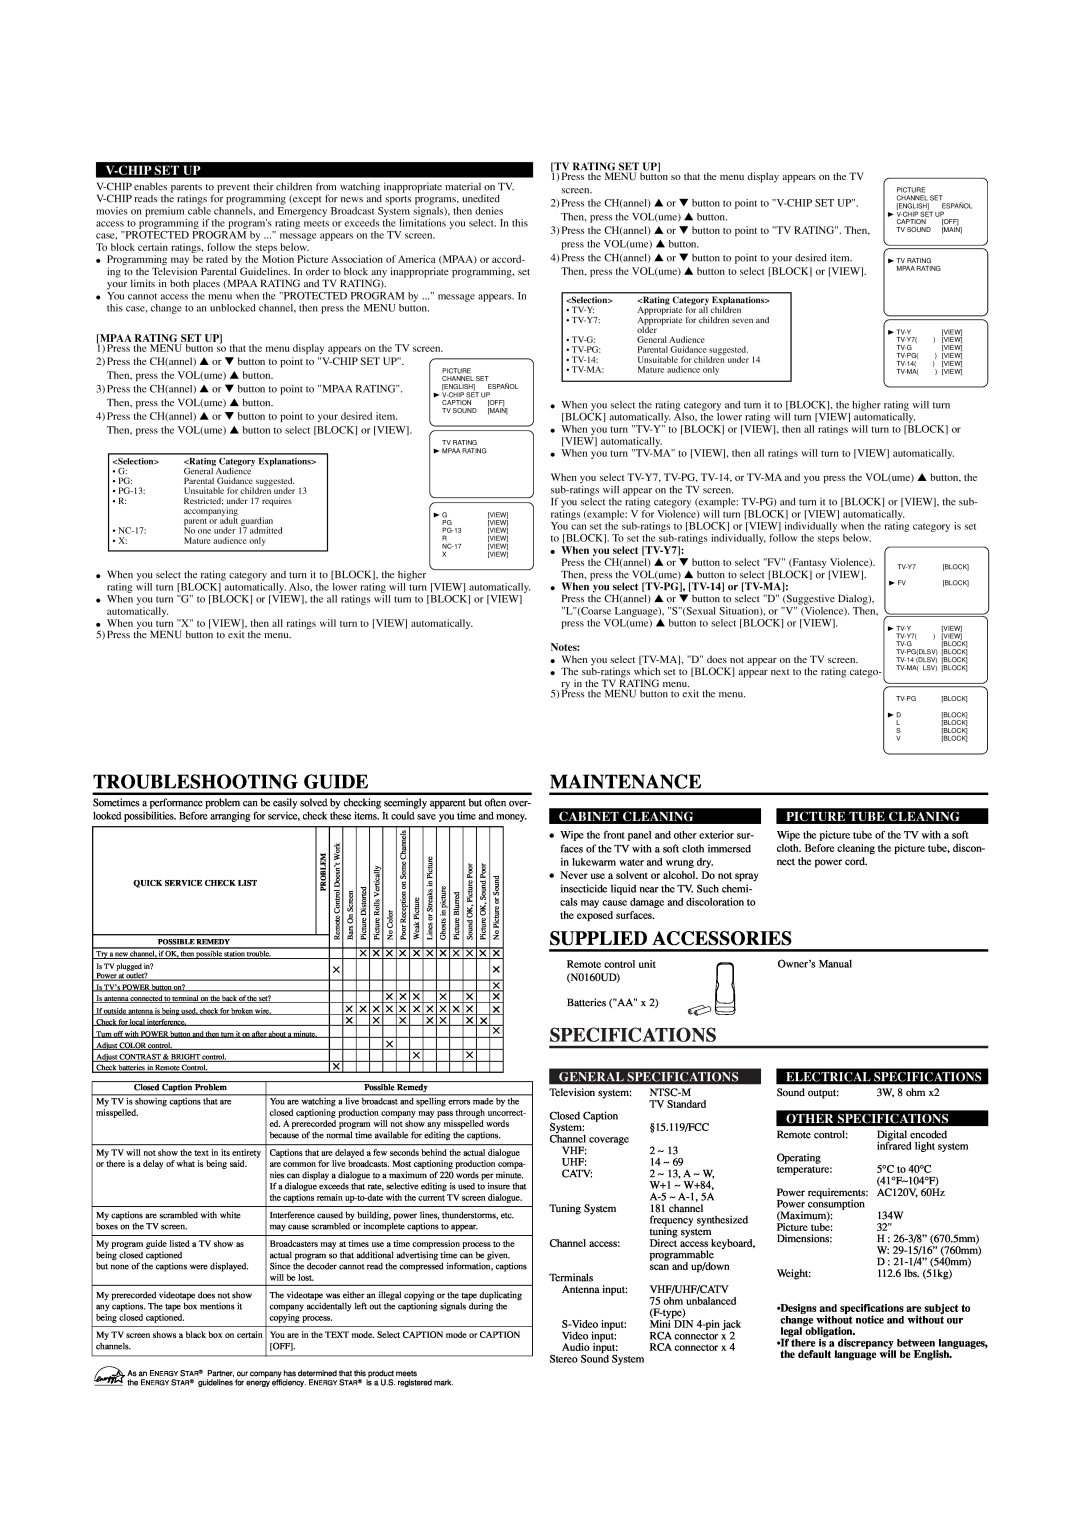 Sylvania SST4322 Troubleshooting Guide, Maintenance, Supplied Accessories, Specifications, V-Chip Set Up, Cabinet Cleaning 